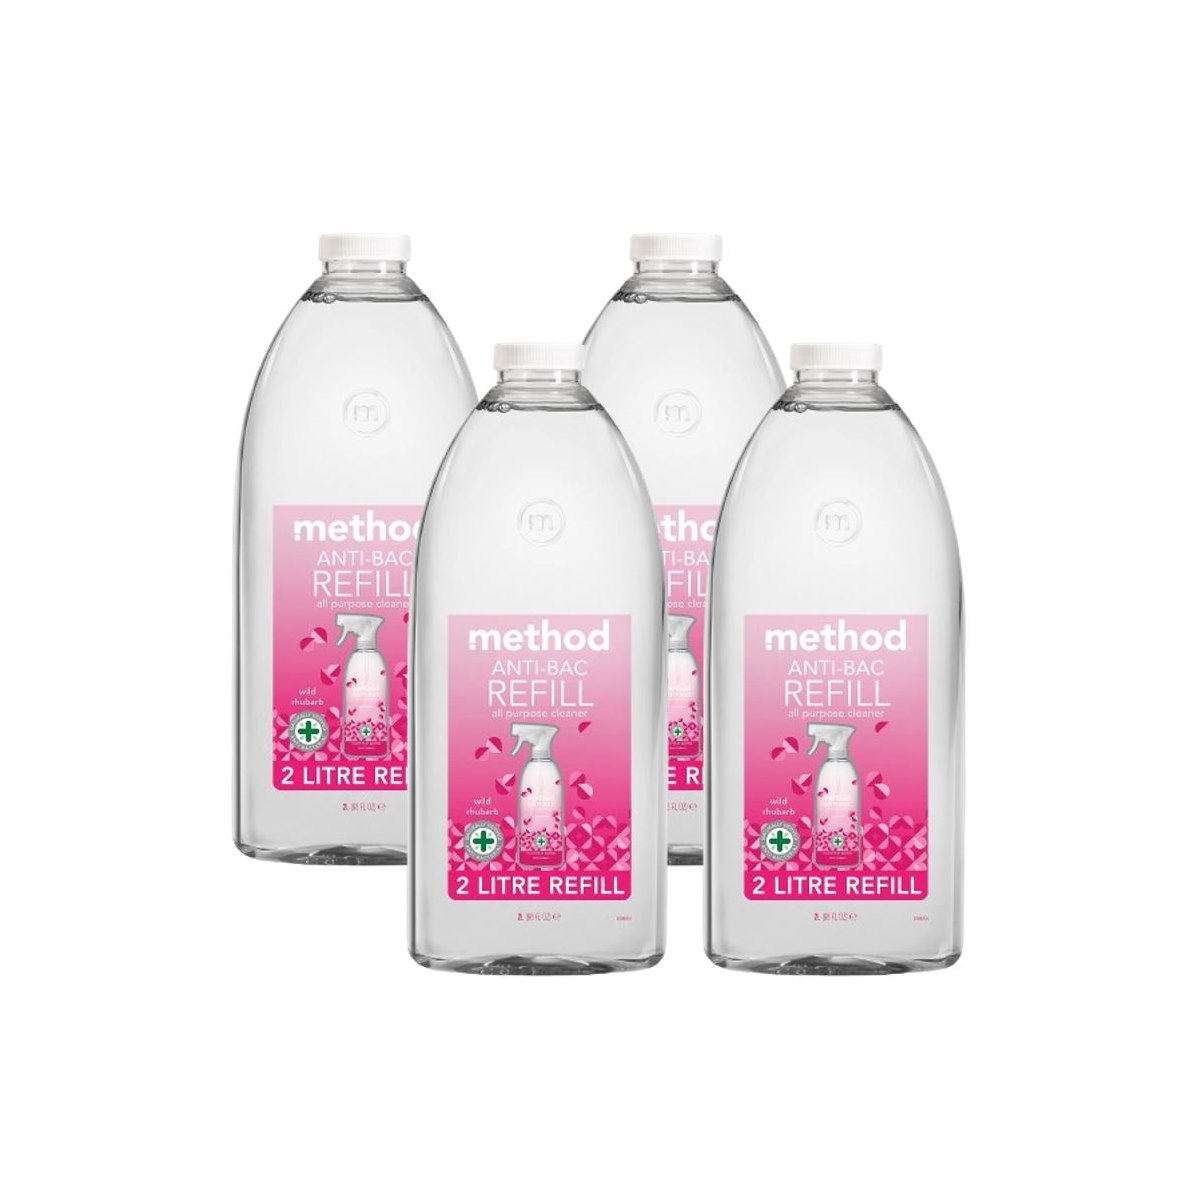 Case of 4 x Method Anti Bac All Purpose Cleaner REFILL 2L